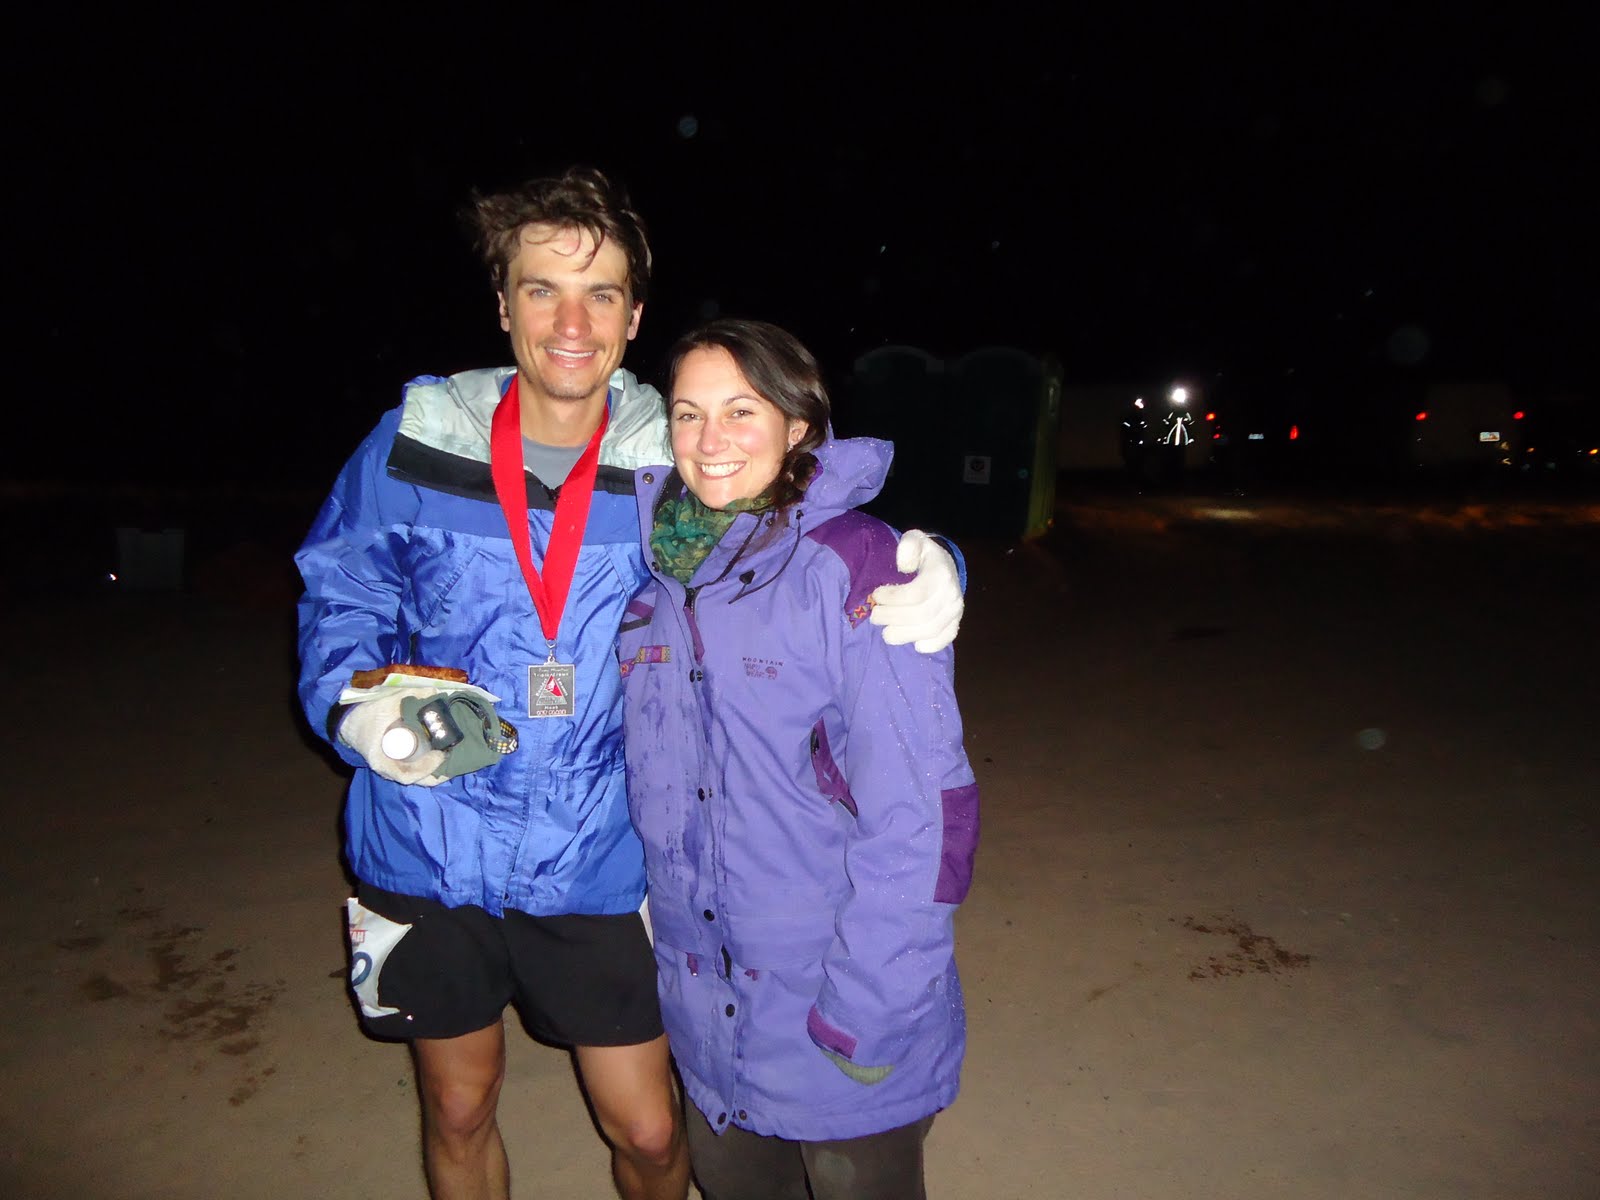 Moab 100 Race Report, March 26th 2011